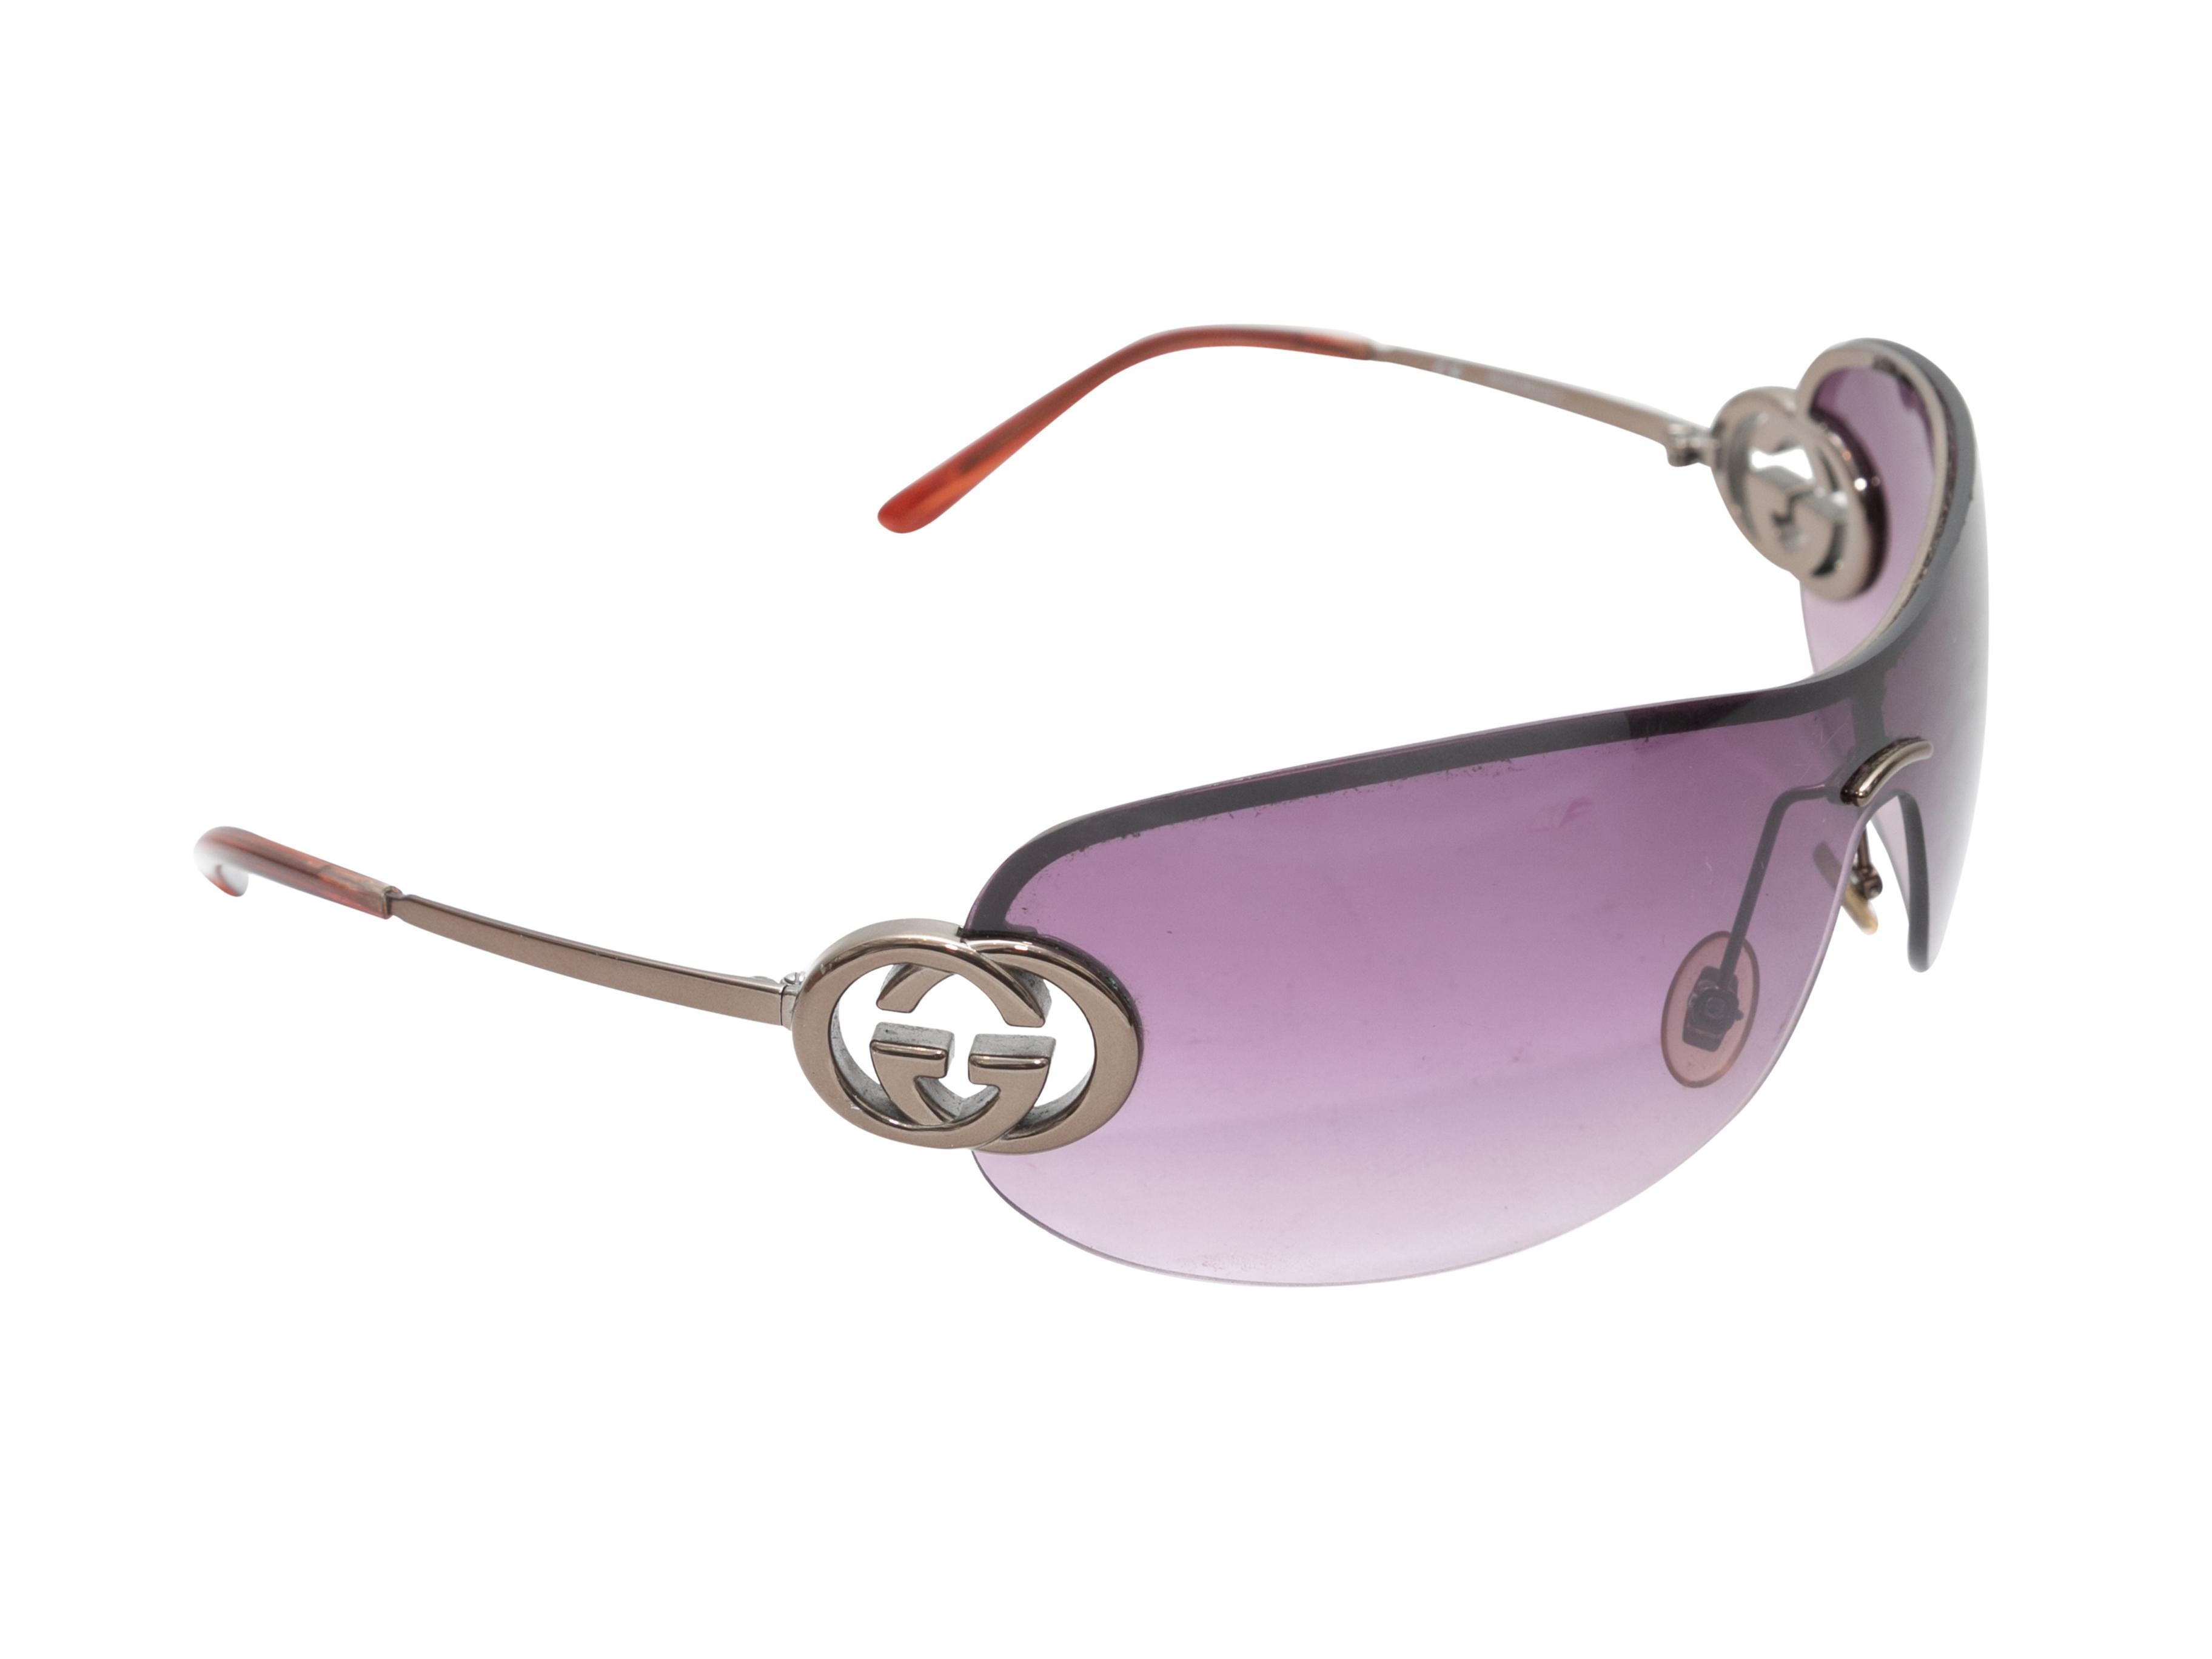 Vintage silver-tone GG sunglasses by Gucci. Purple tinted shield lenses. 2